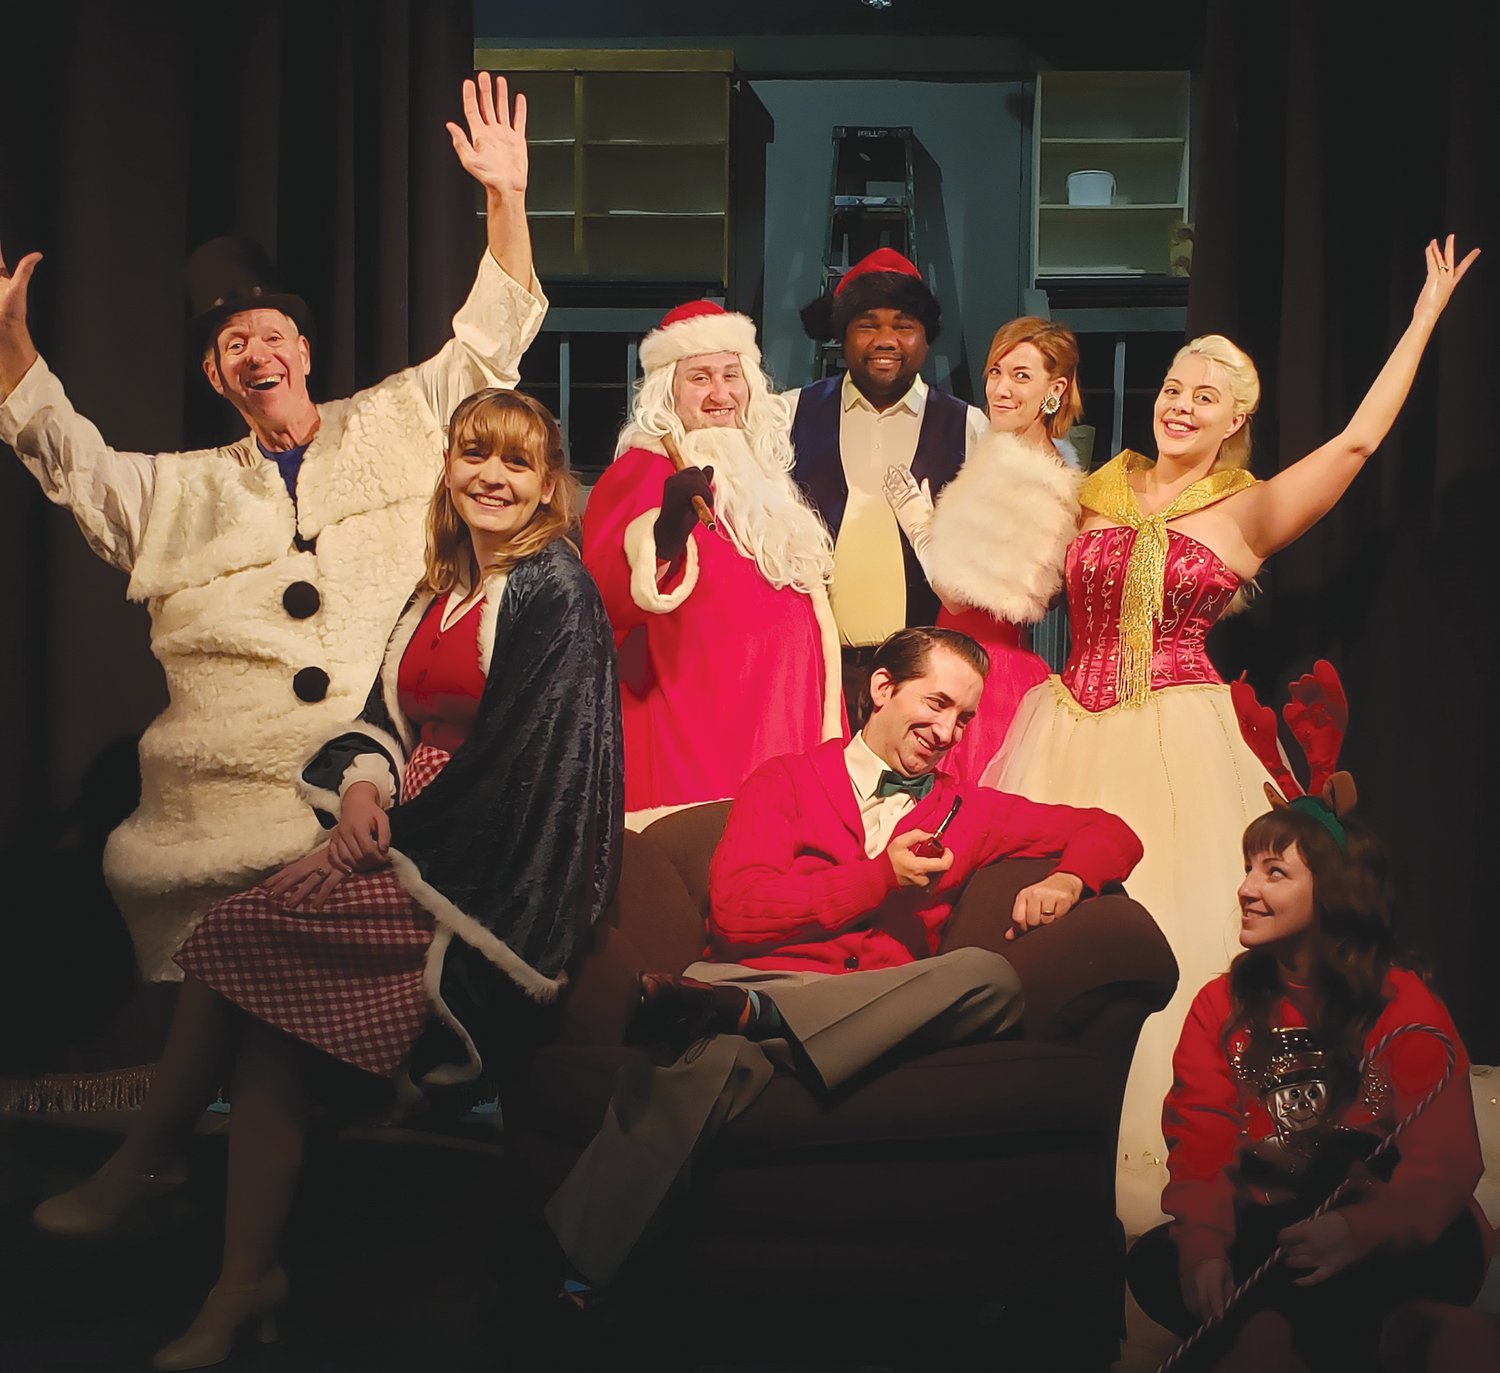 The cast gets ready for the merriment of a Christmas special, as Myers Dinner Theatre presents Hollywood Hearth and Home, a Christmas musical revue. Pictured, from left, standing are Don Hart, T.J. Bird, Kevin Ray Johnson, Sarah Hayes and Elsa Scott Besler; and seated are Rachel Henry Johnson, Thomas J. Besler and Lauren Morgan. The show opens Friday and continues through Dec. 20.